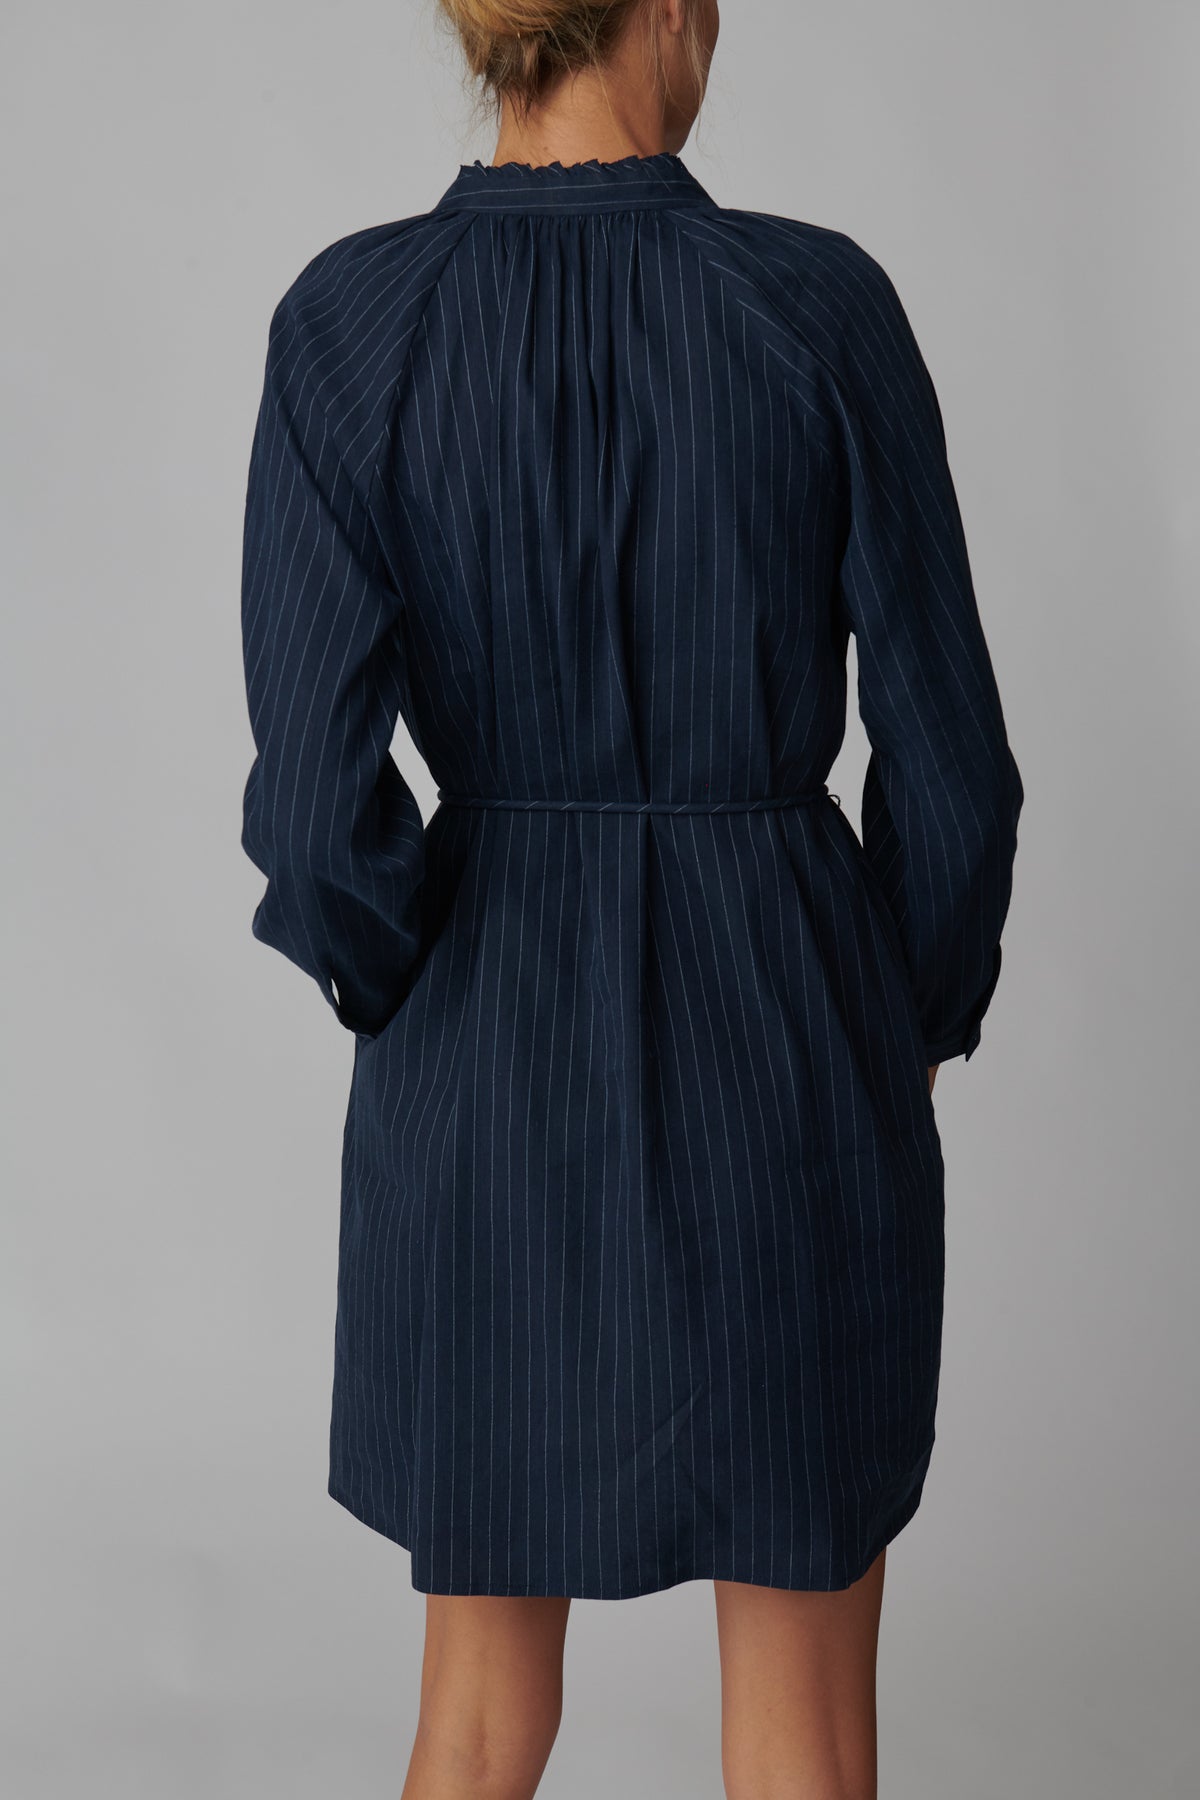 Emeline is 5'11 and wears a size S in navy pinstripe